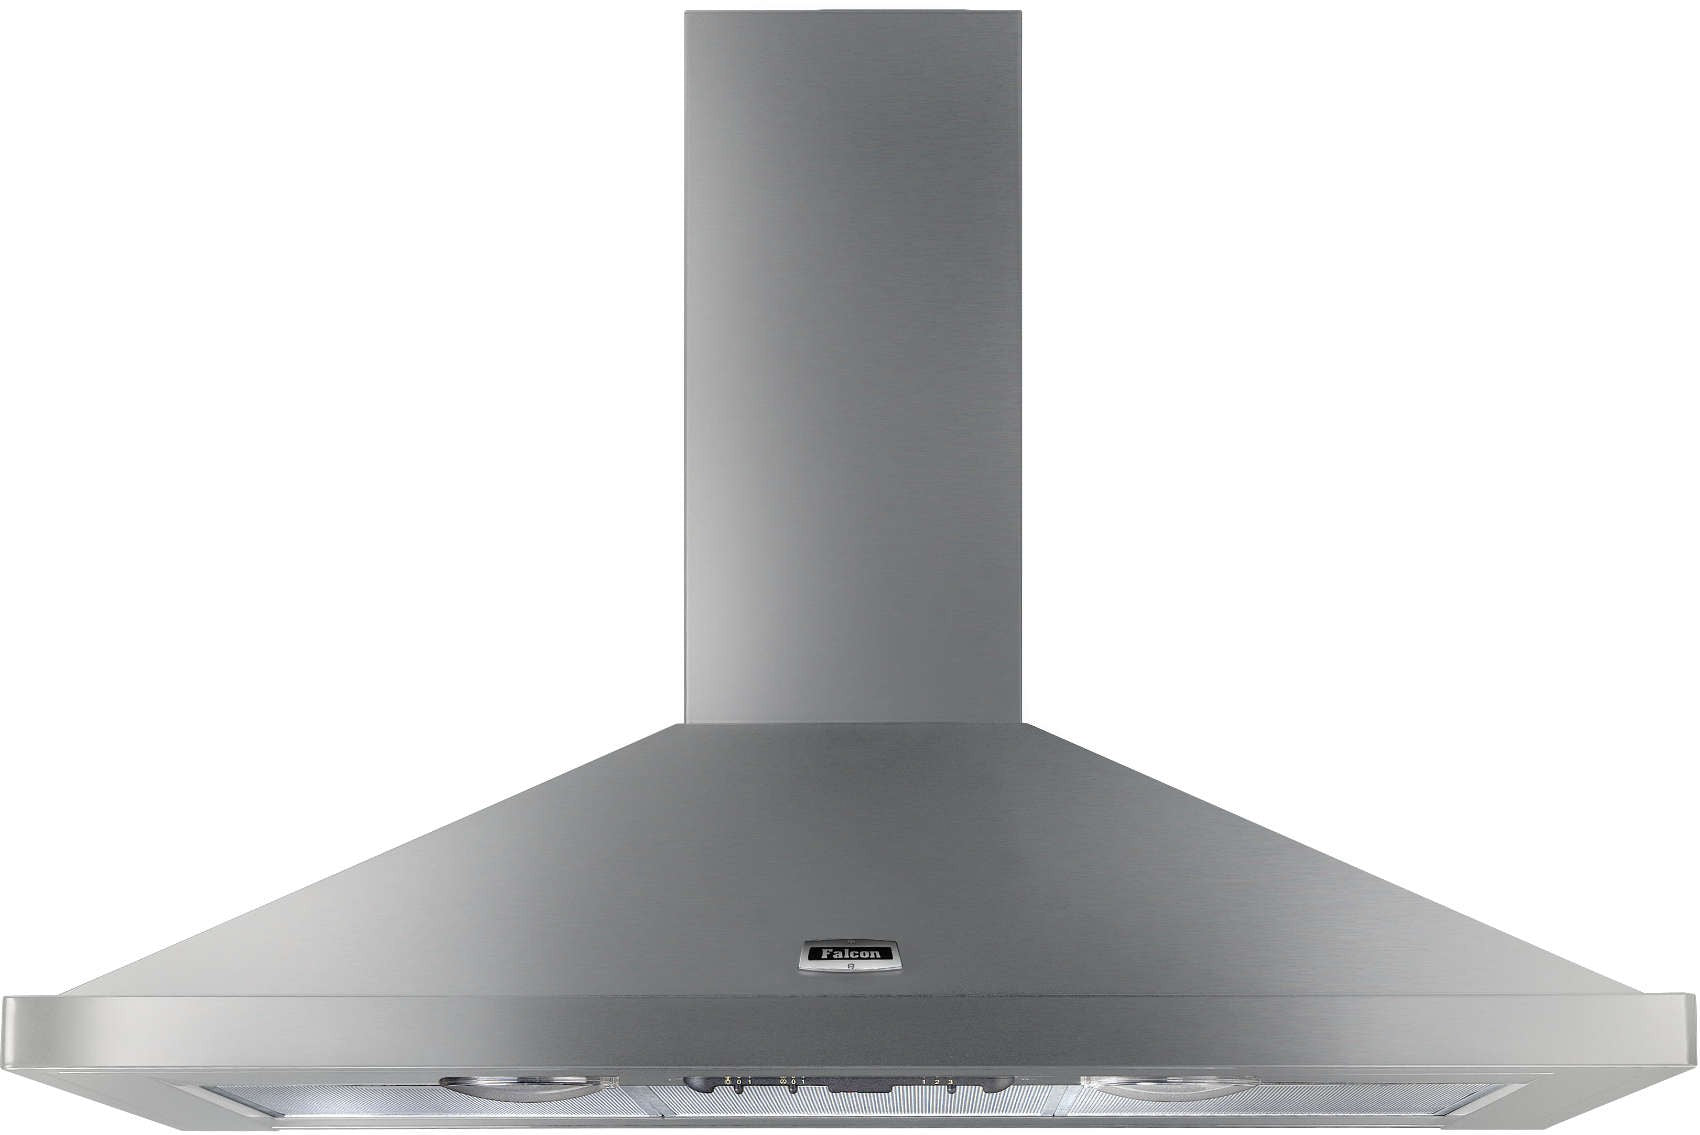 Falcon LEIHDC100SS/C 100cm Classic Chimney Hood in Stainless Steel